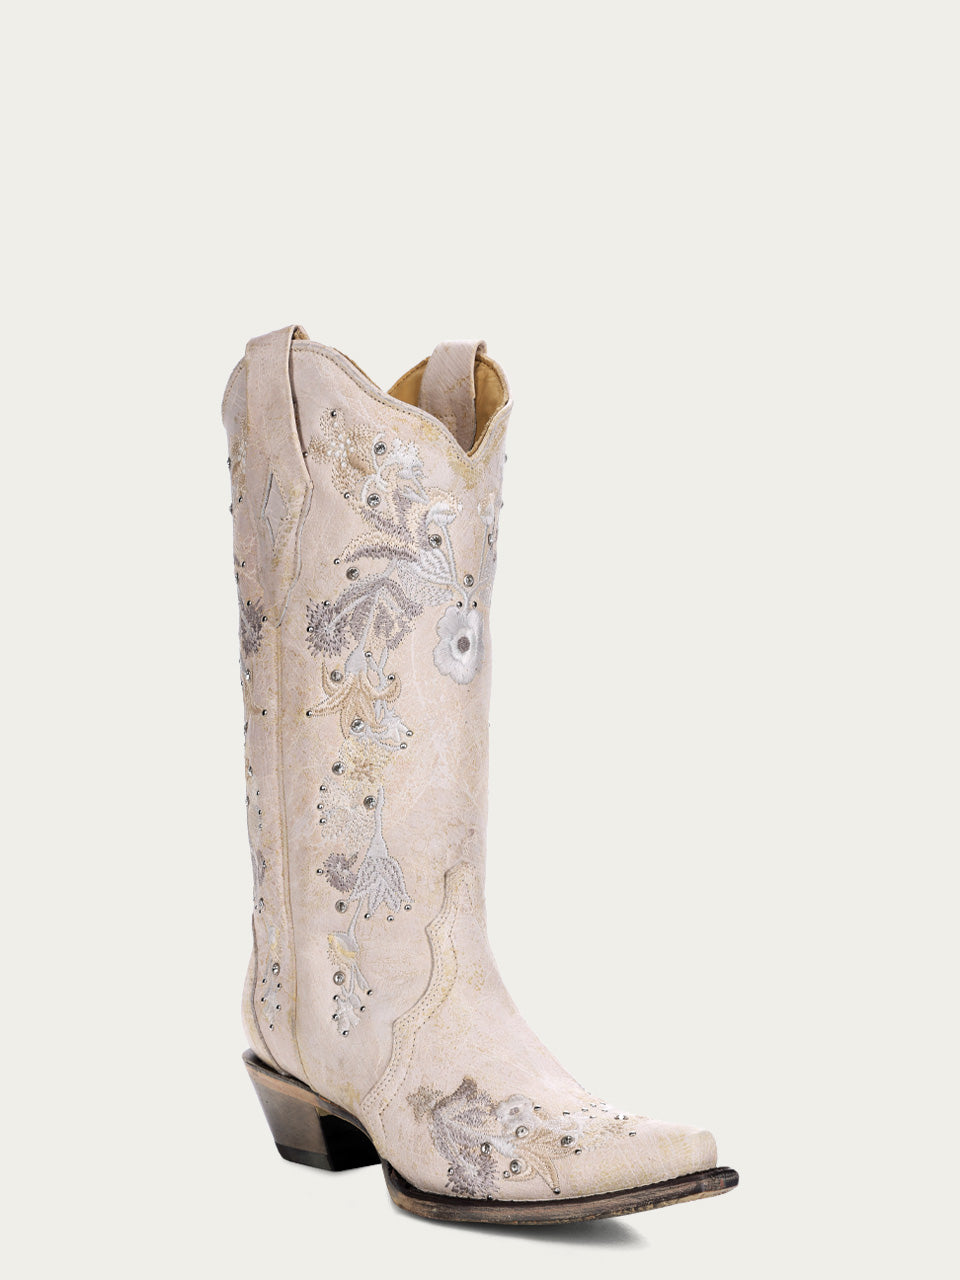 A3521 - WOMEN'S WHITE FLORAL EMBROIDERY AND CRYSTALS COWBOY BOOT